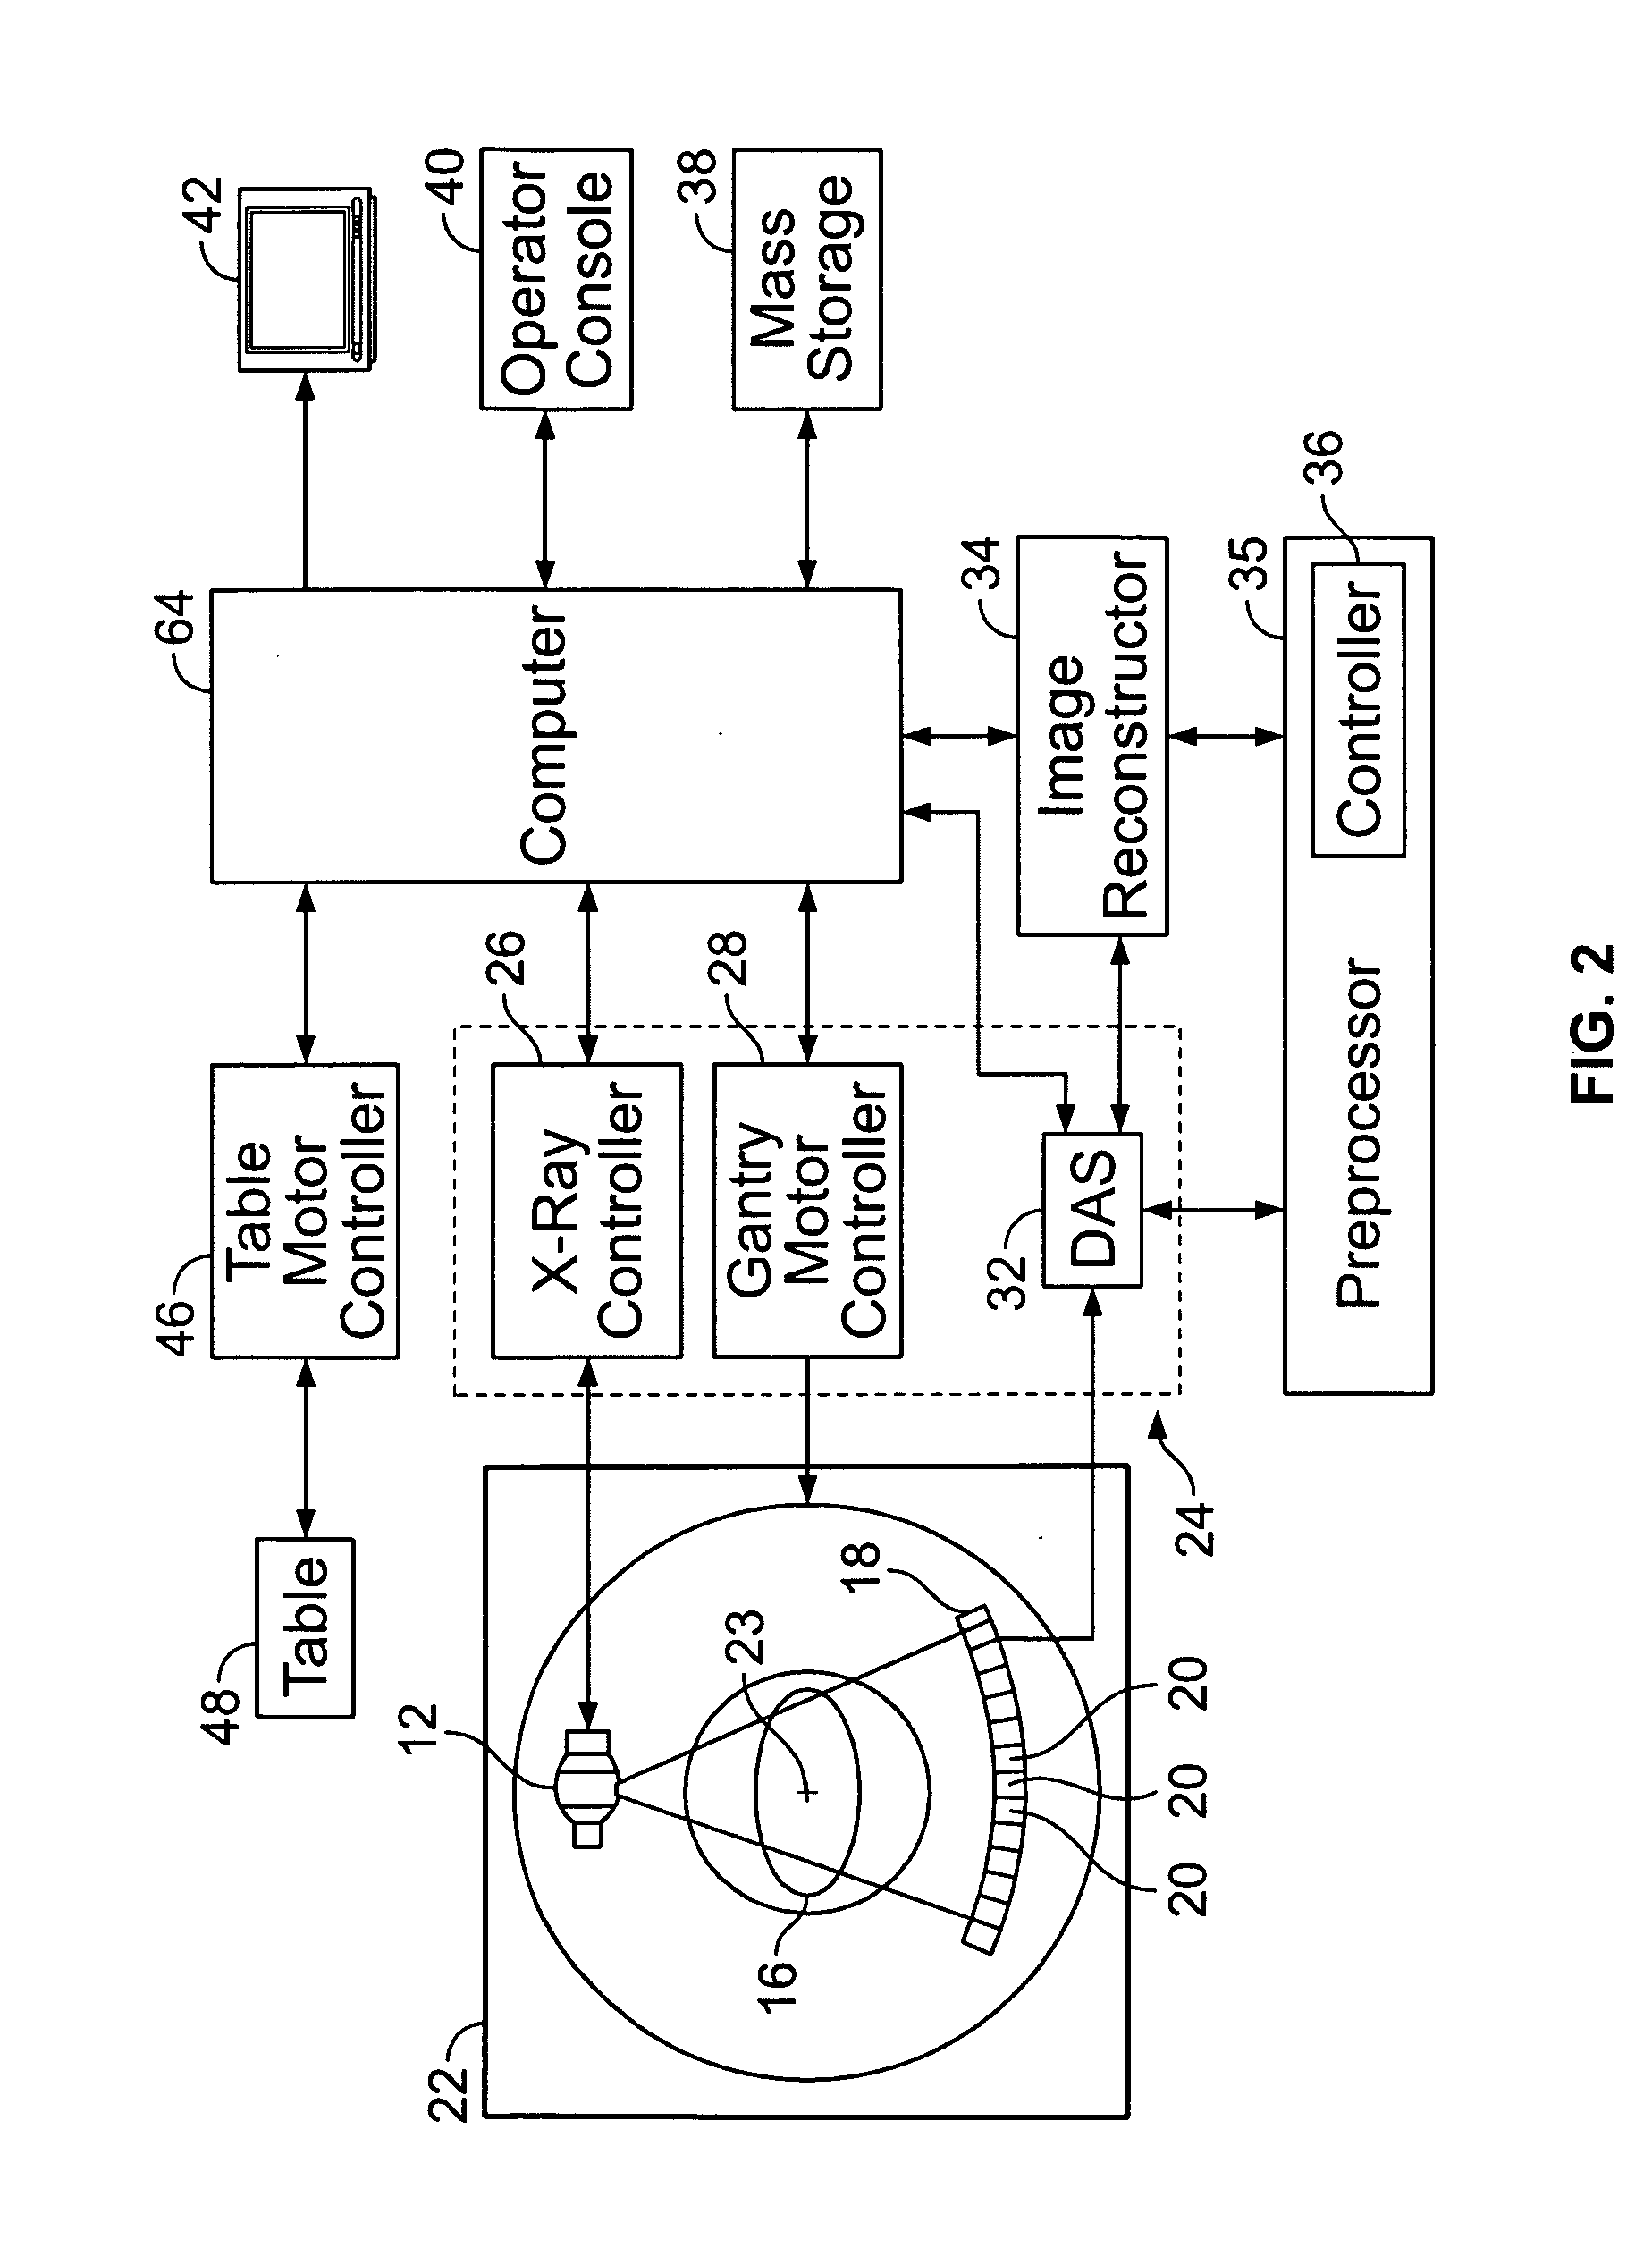 Systems and methods for improving a resolution of an image